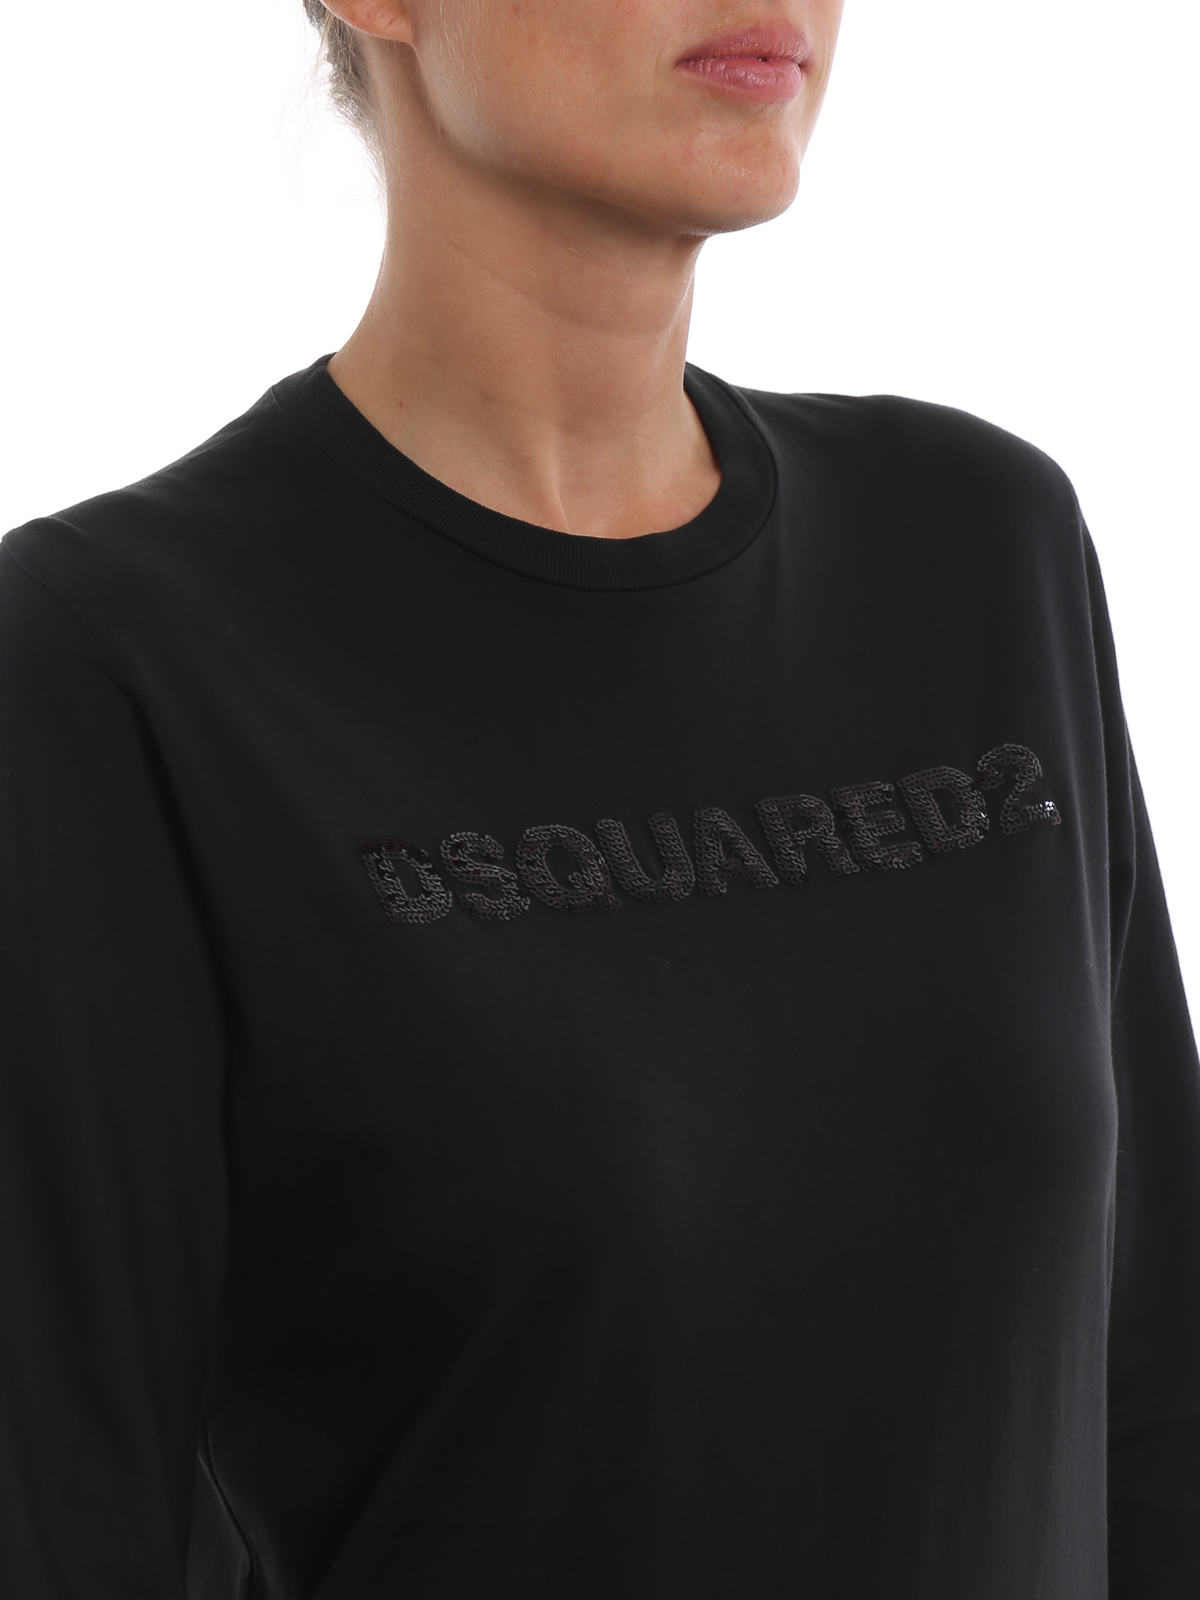 dsquared long sleeve